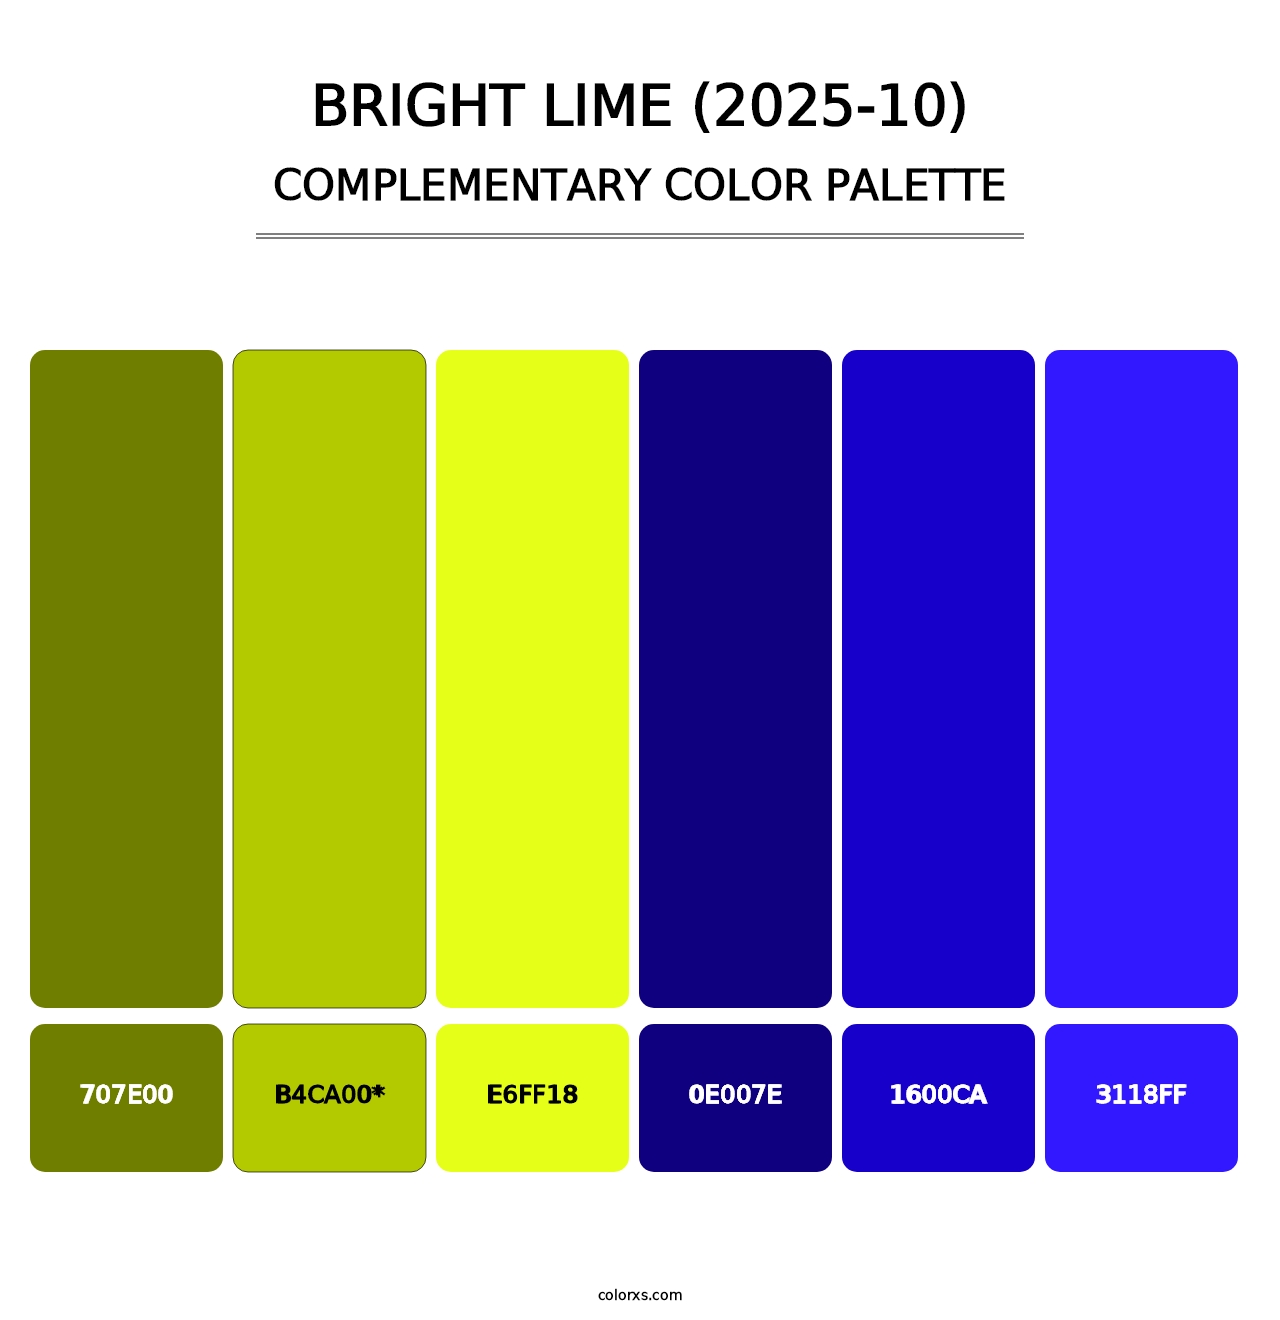 Bright Lime (2025-10) - Complementary Color Palette